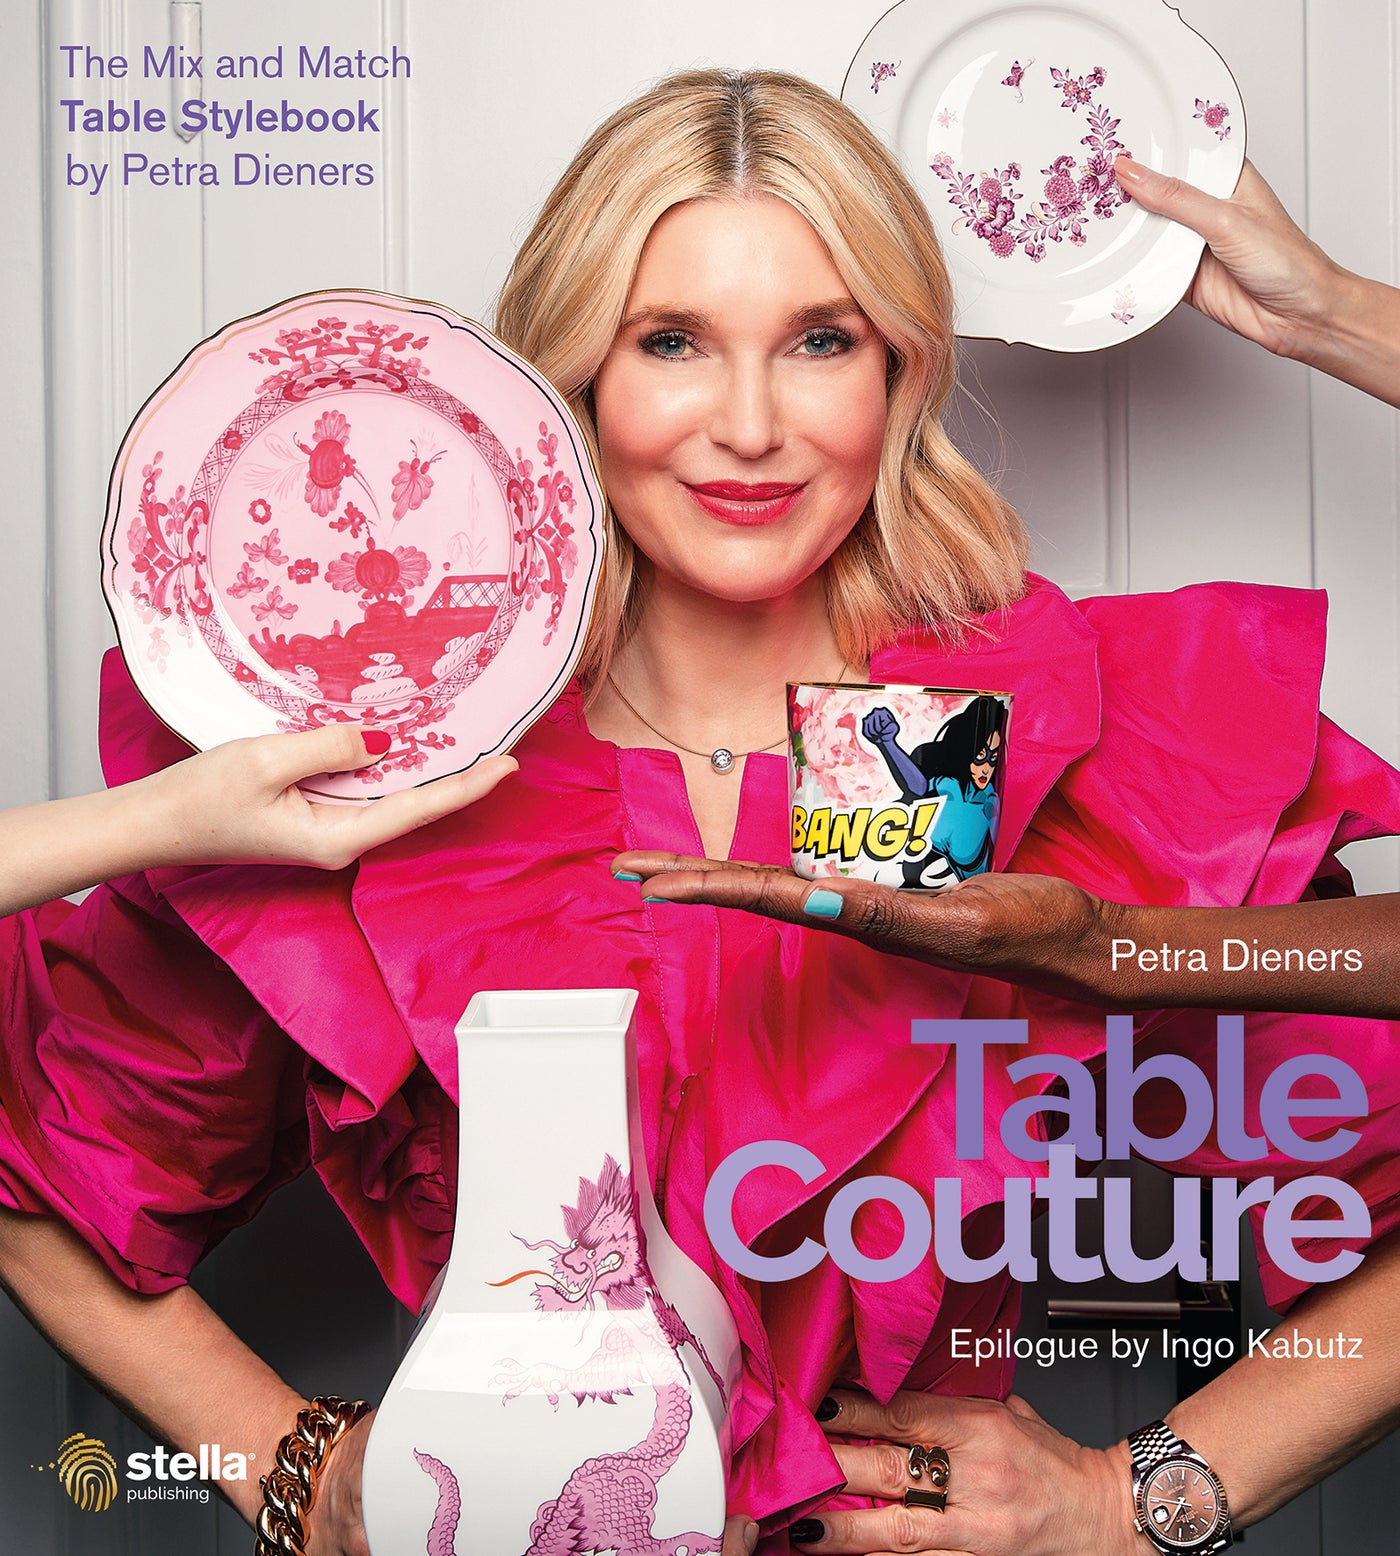 ADVANCE SALE: TABLE COUTURE The Mix and Match Table Stylebook by